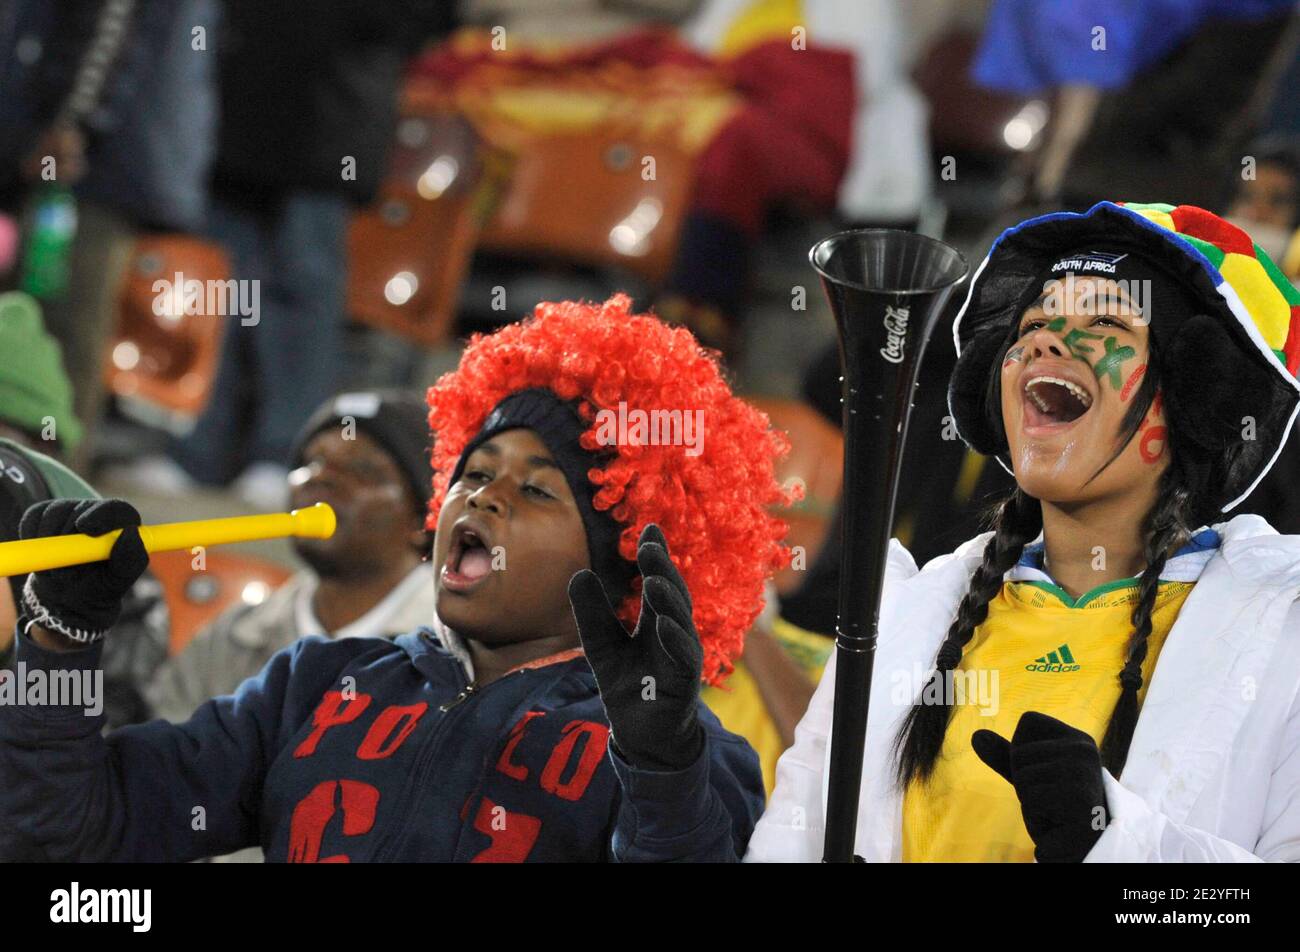 Mexico Fans during the 2010 FIFA World Cup soccer match, Group A, France vs Mexico at Peter Mokaba Stadium, in Polokwane, South Africa on June 17, 2010. Mexico won 2-0. Photo by Christophe Guibbaud/Cameleon/ABACAPRESS.COM Stock Photo